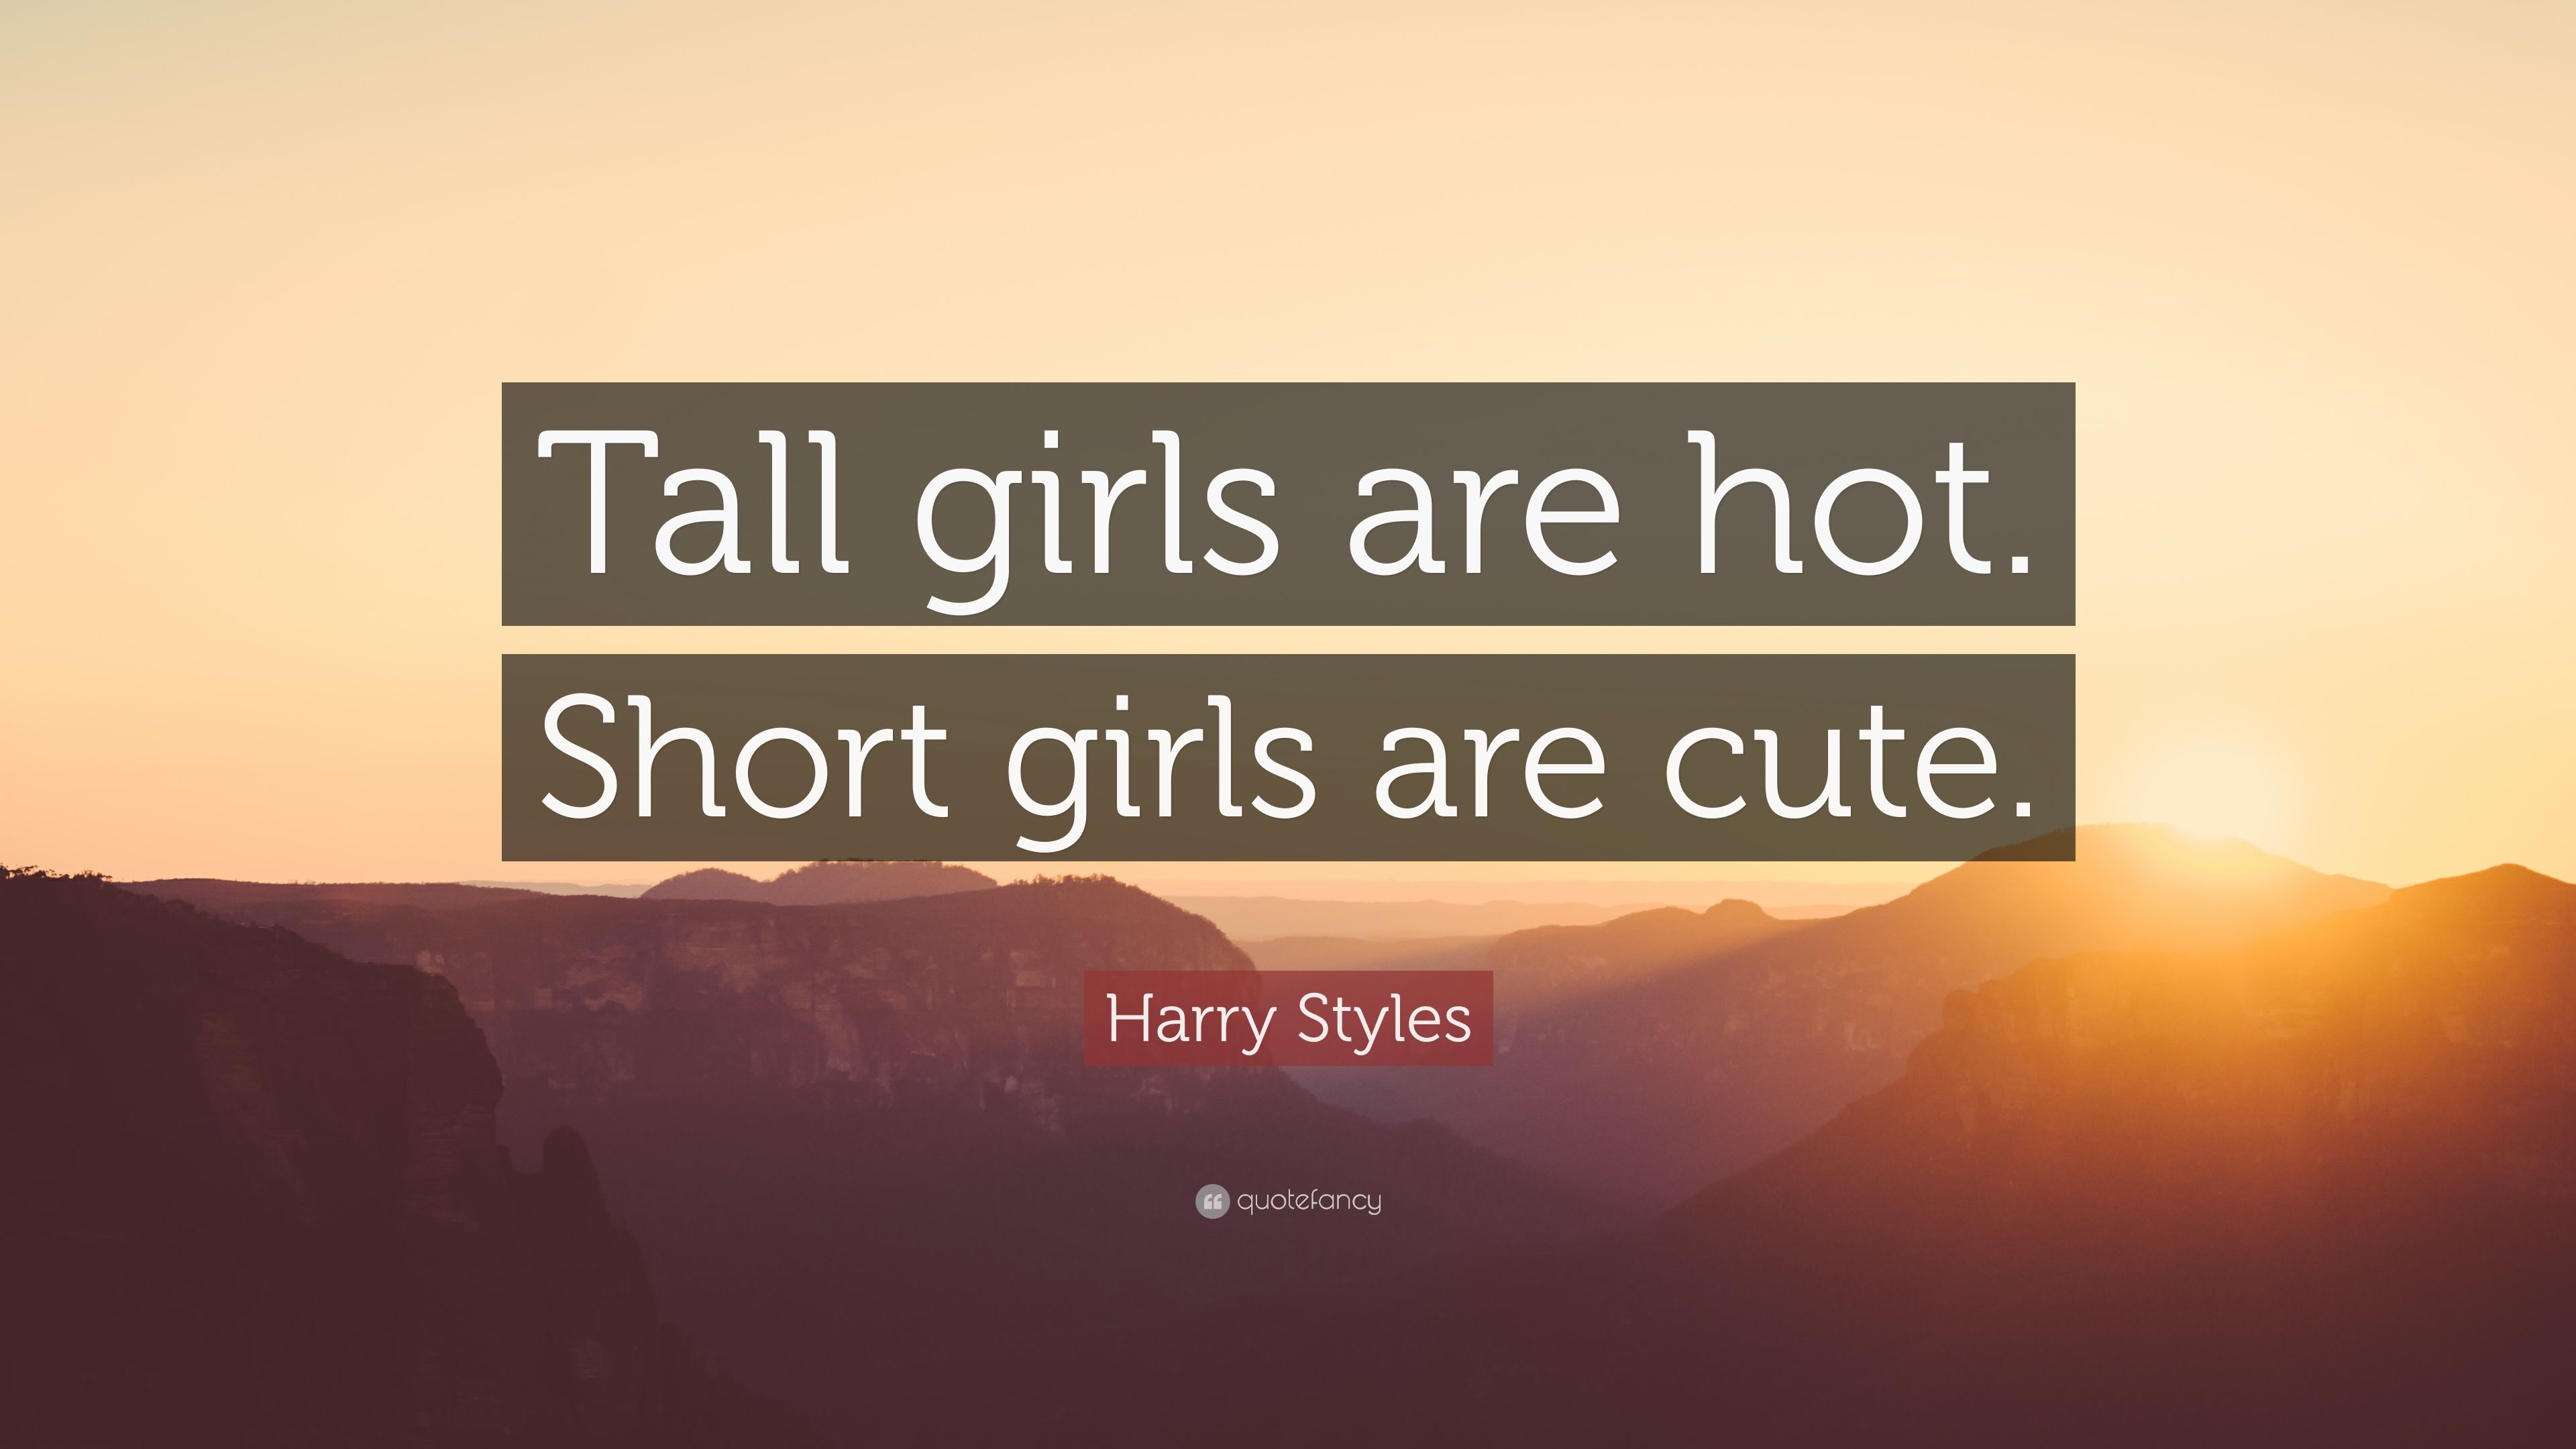 Harry Styles Quote: “Tall girls are hot. Short girls are cute.” (12 wallpaper)